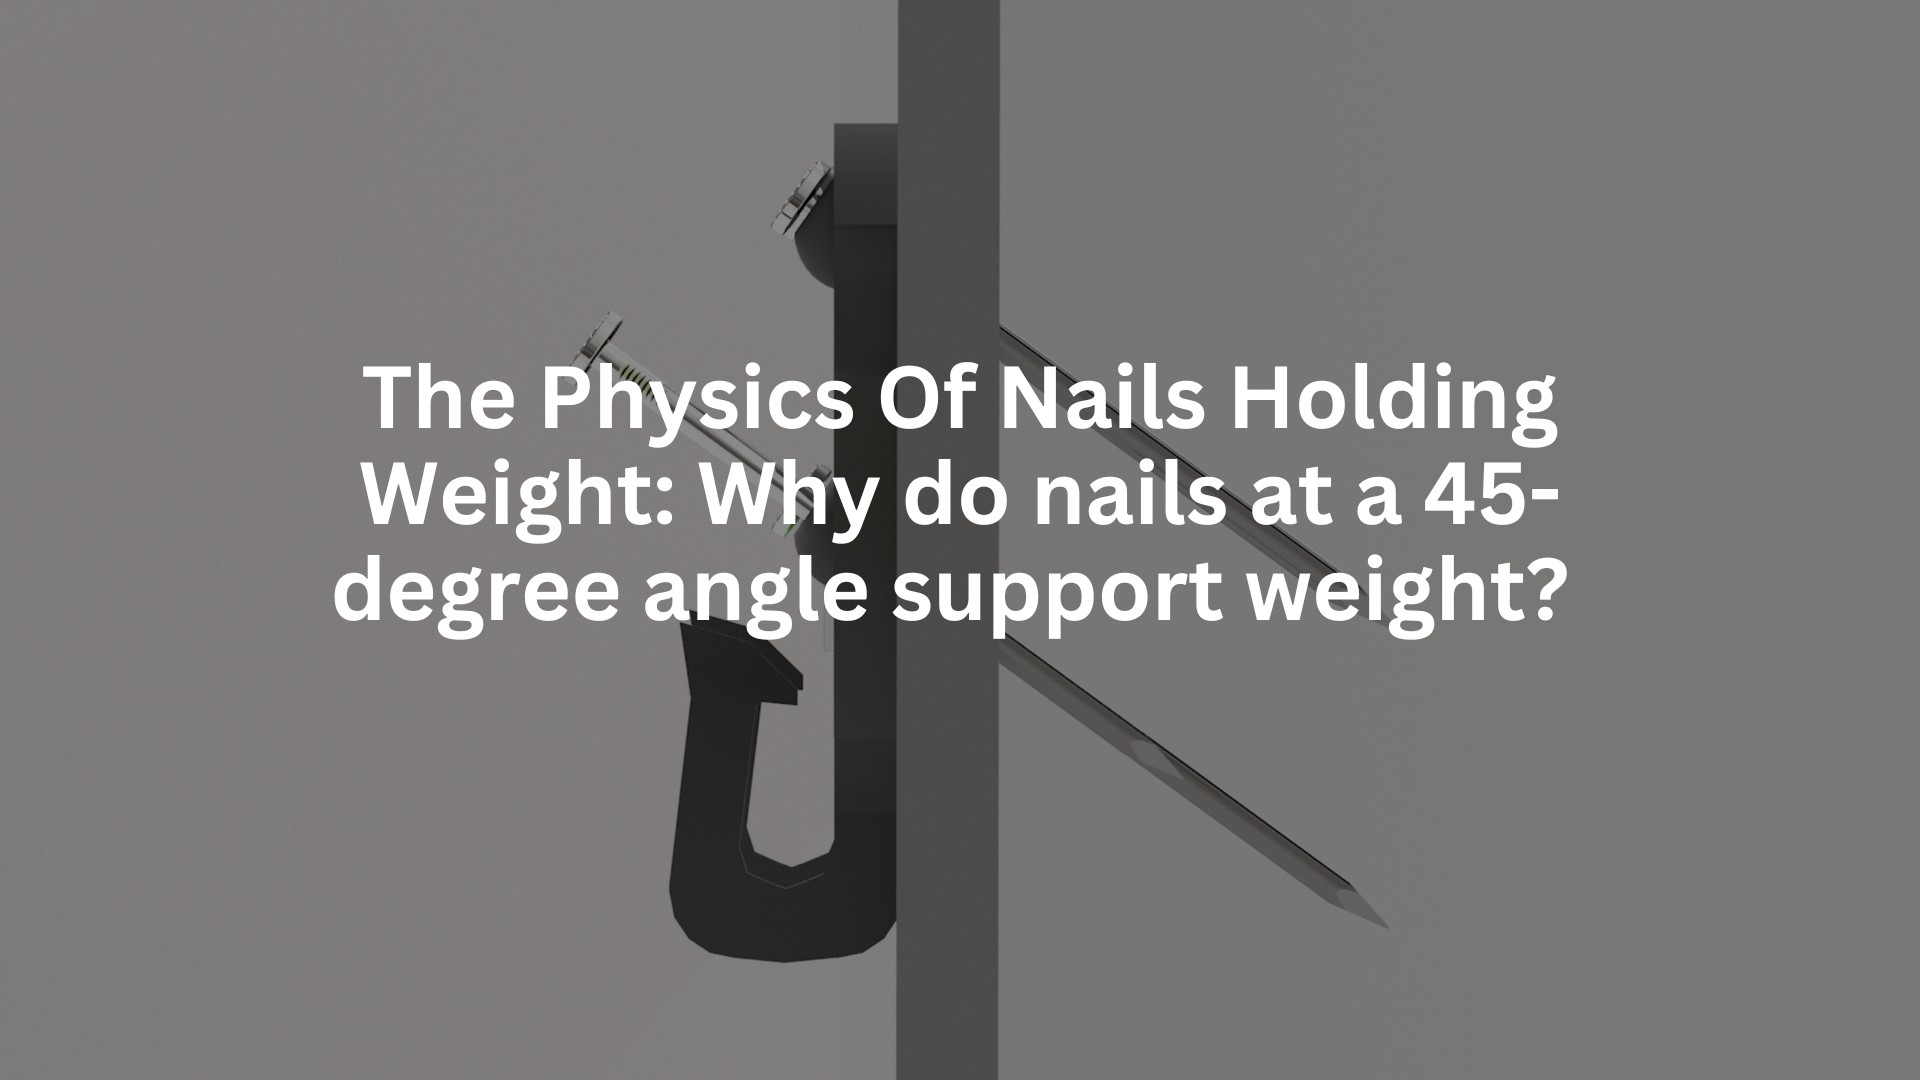 The physics of nails holding weight: Why do nails at a 45-degree angle support weight?